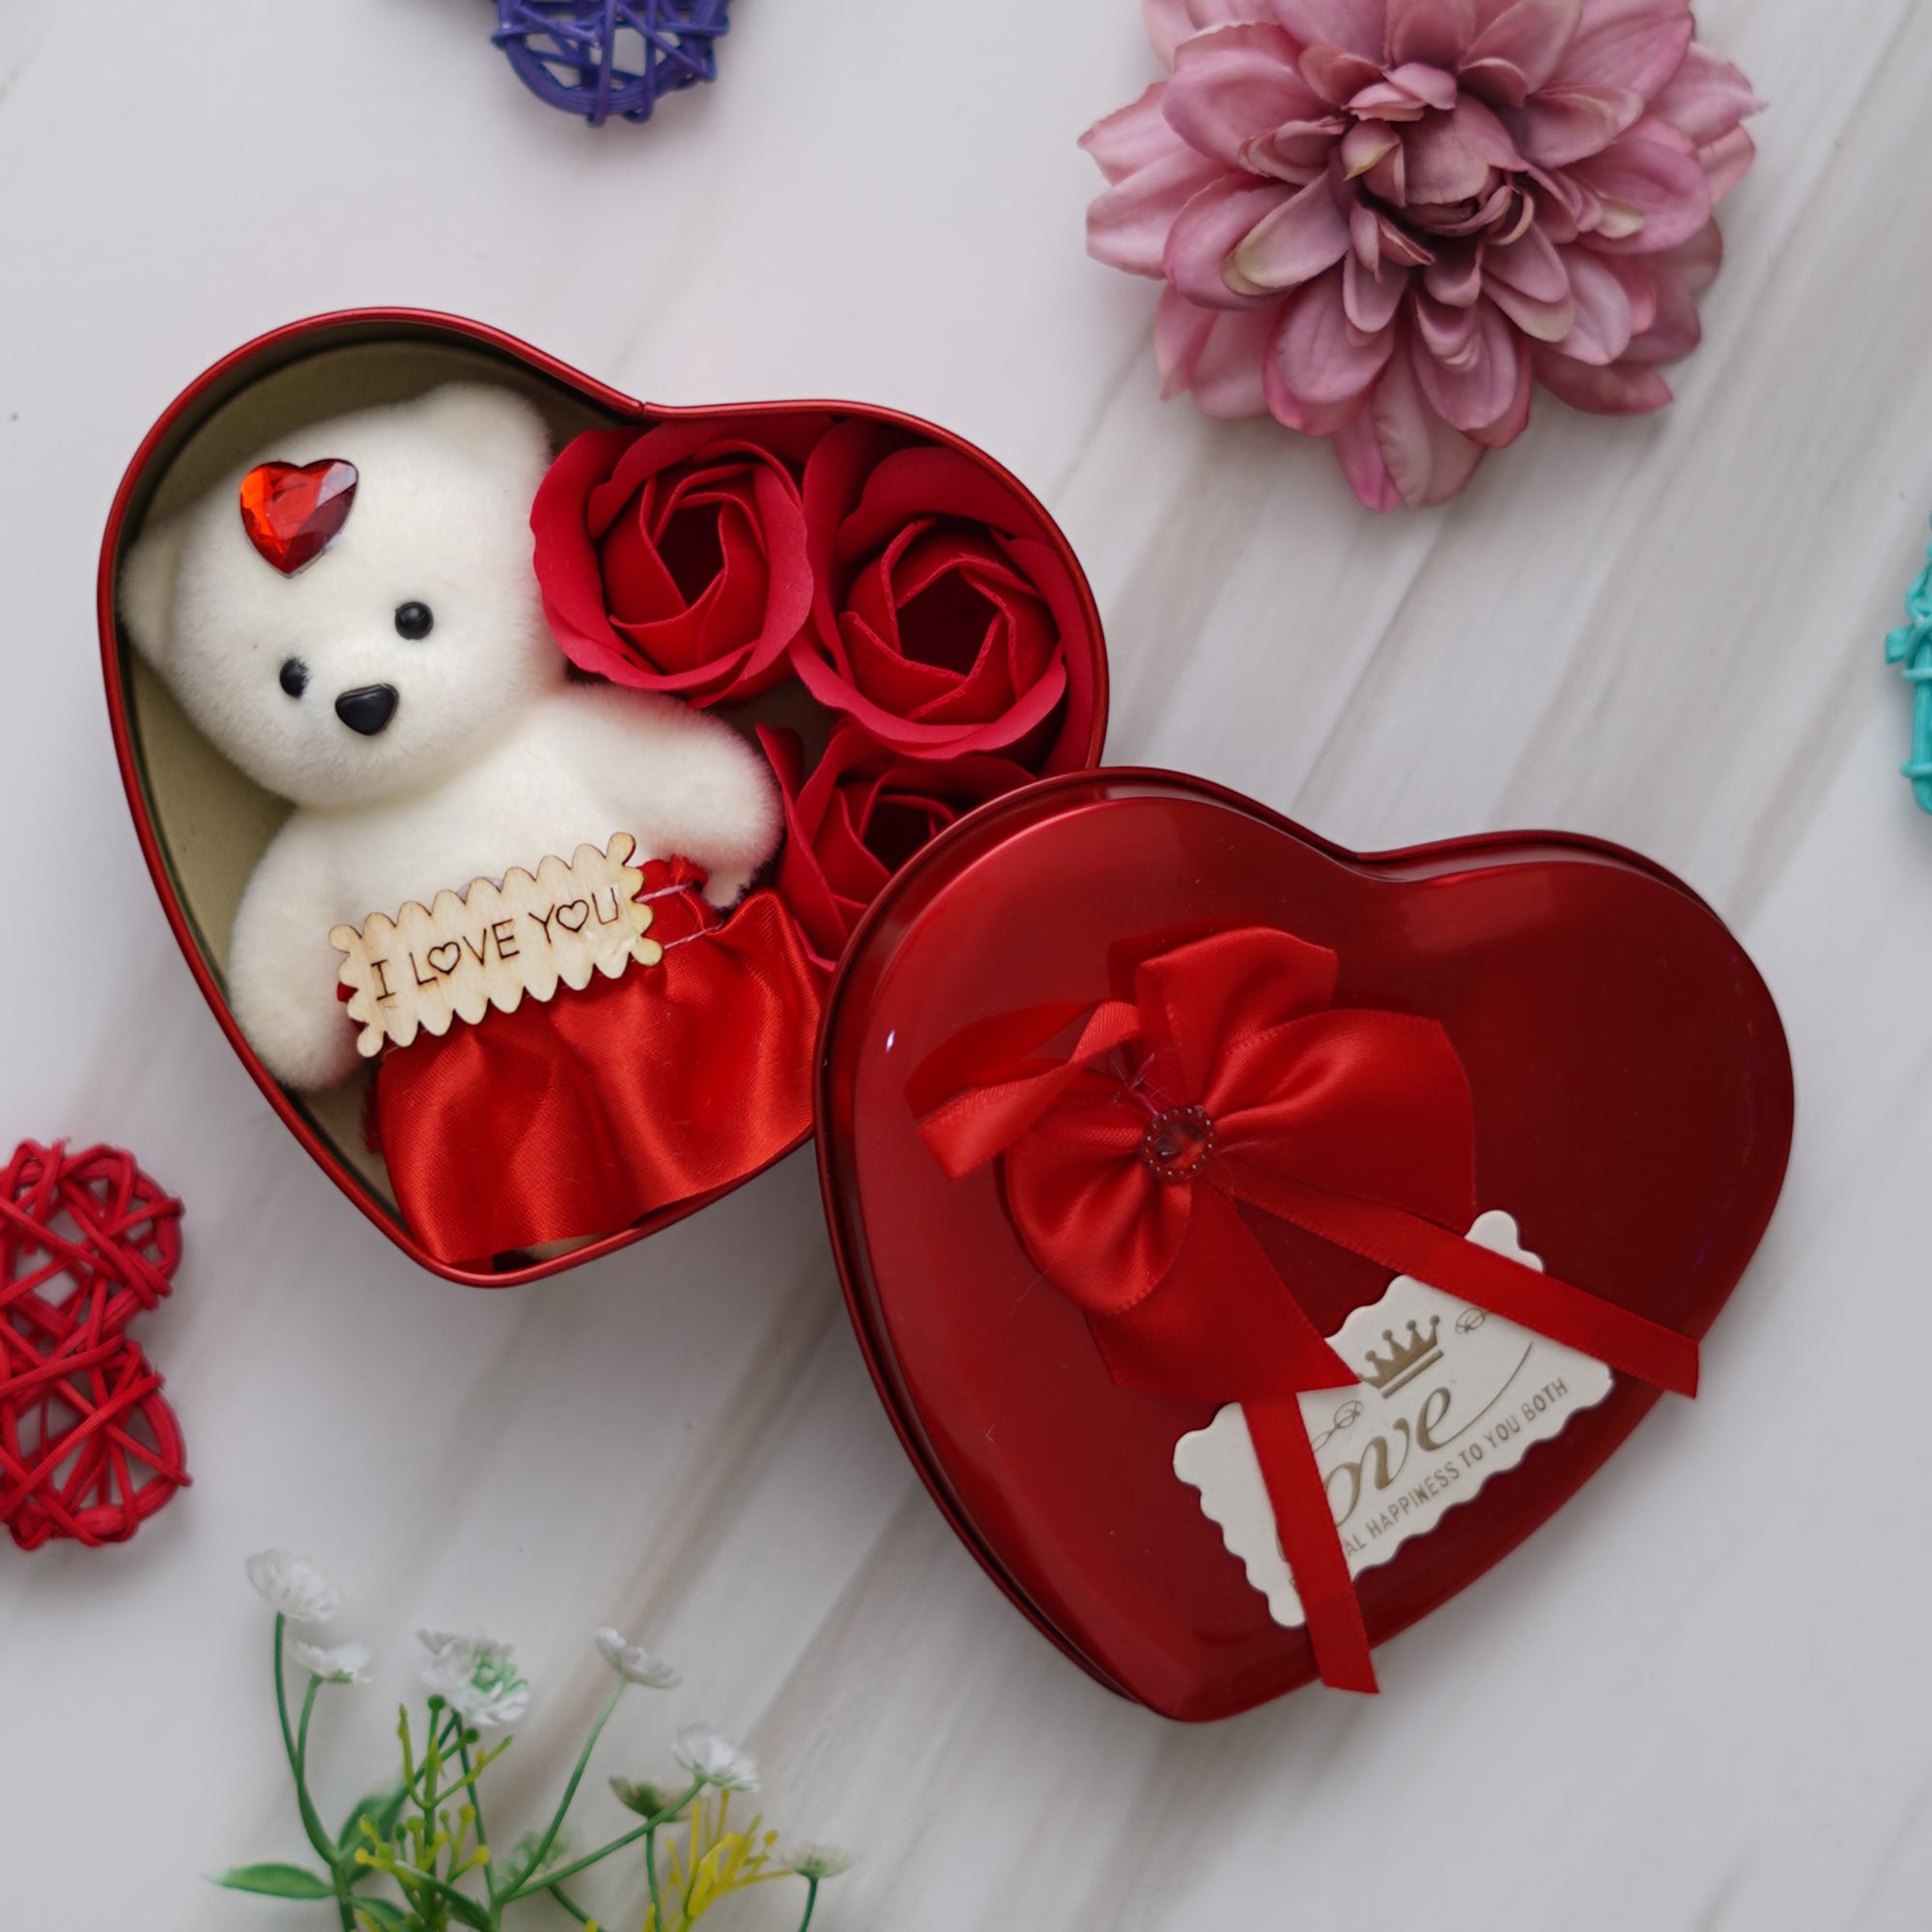 Valentine Combo of Pack of 8 Love Gift Cards, "Love You" Wooden Showpiece With Stand, Heart Shaped Gift Box Set with White Teddy and Red Roses 5